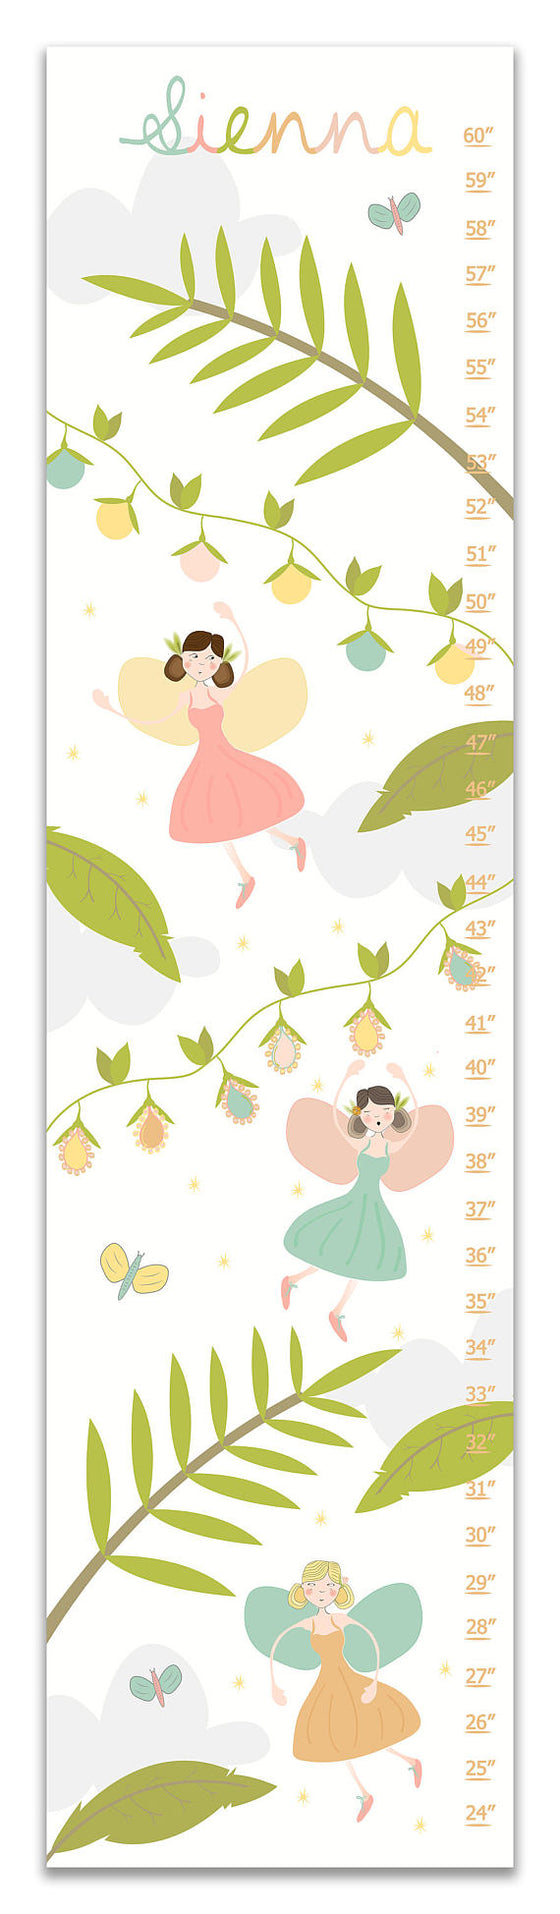 Woodland Fairy Personalized Growth Chart - Nursery Decor - Baby Gifts